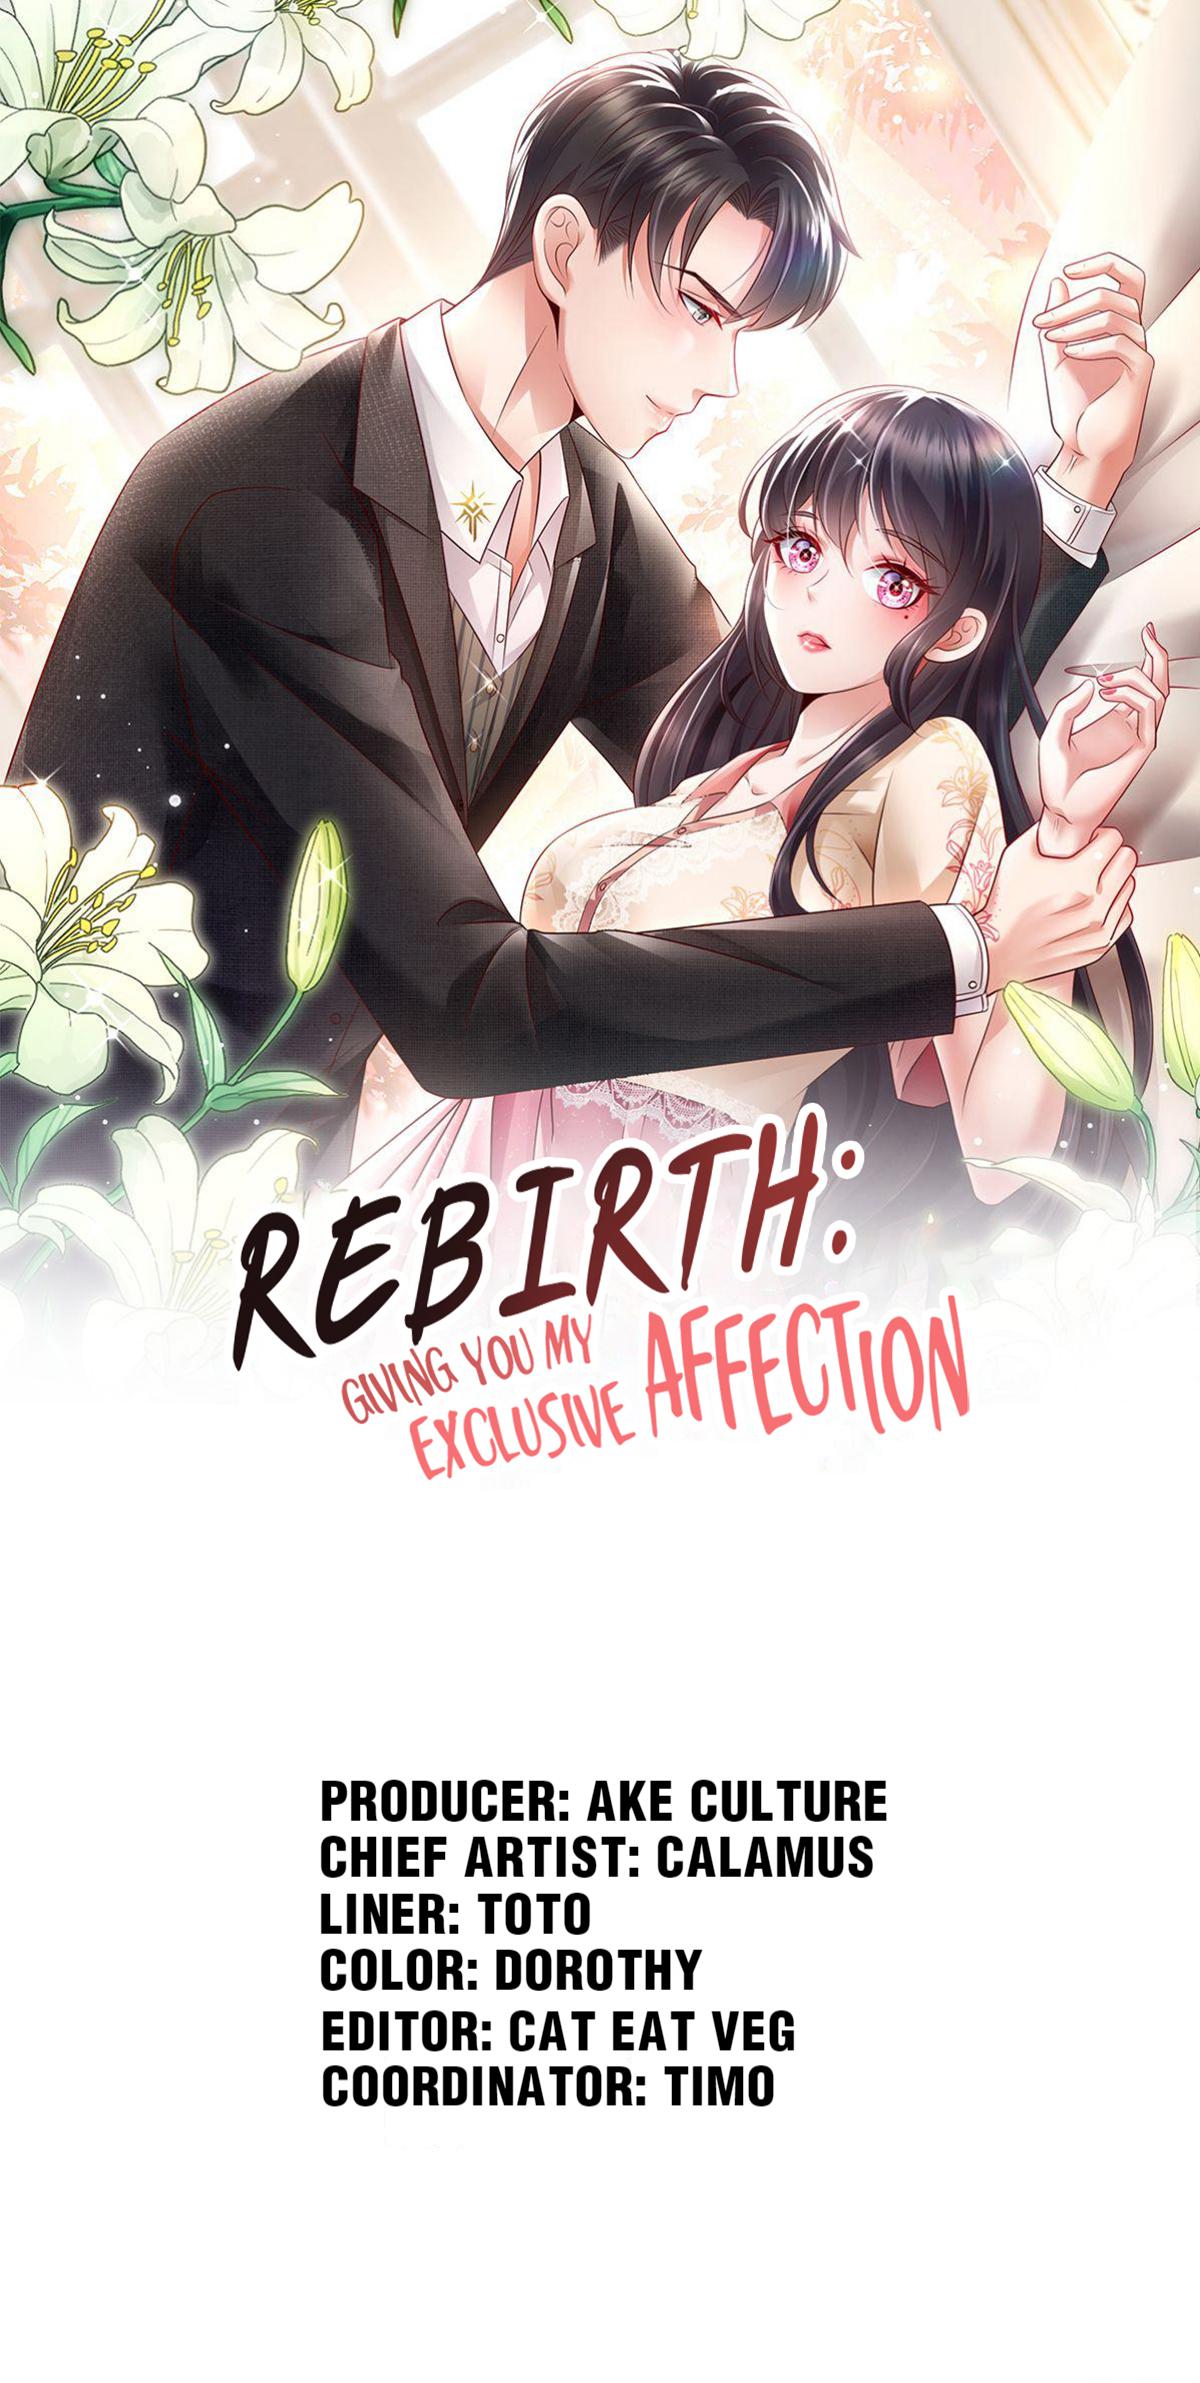 Rebirth: Giving You My Exclusive Affection 44.1 Flee in Panic